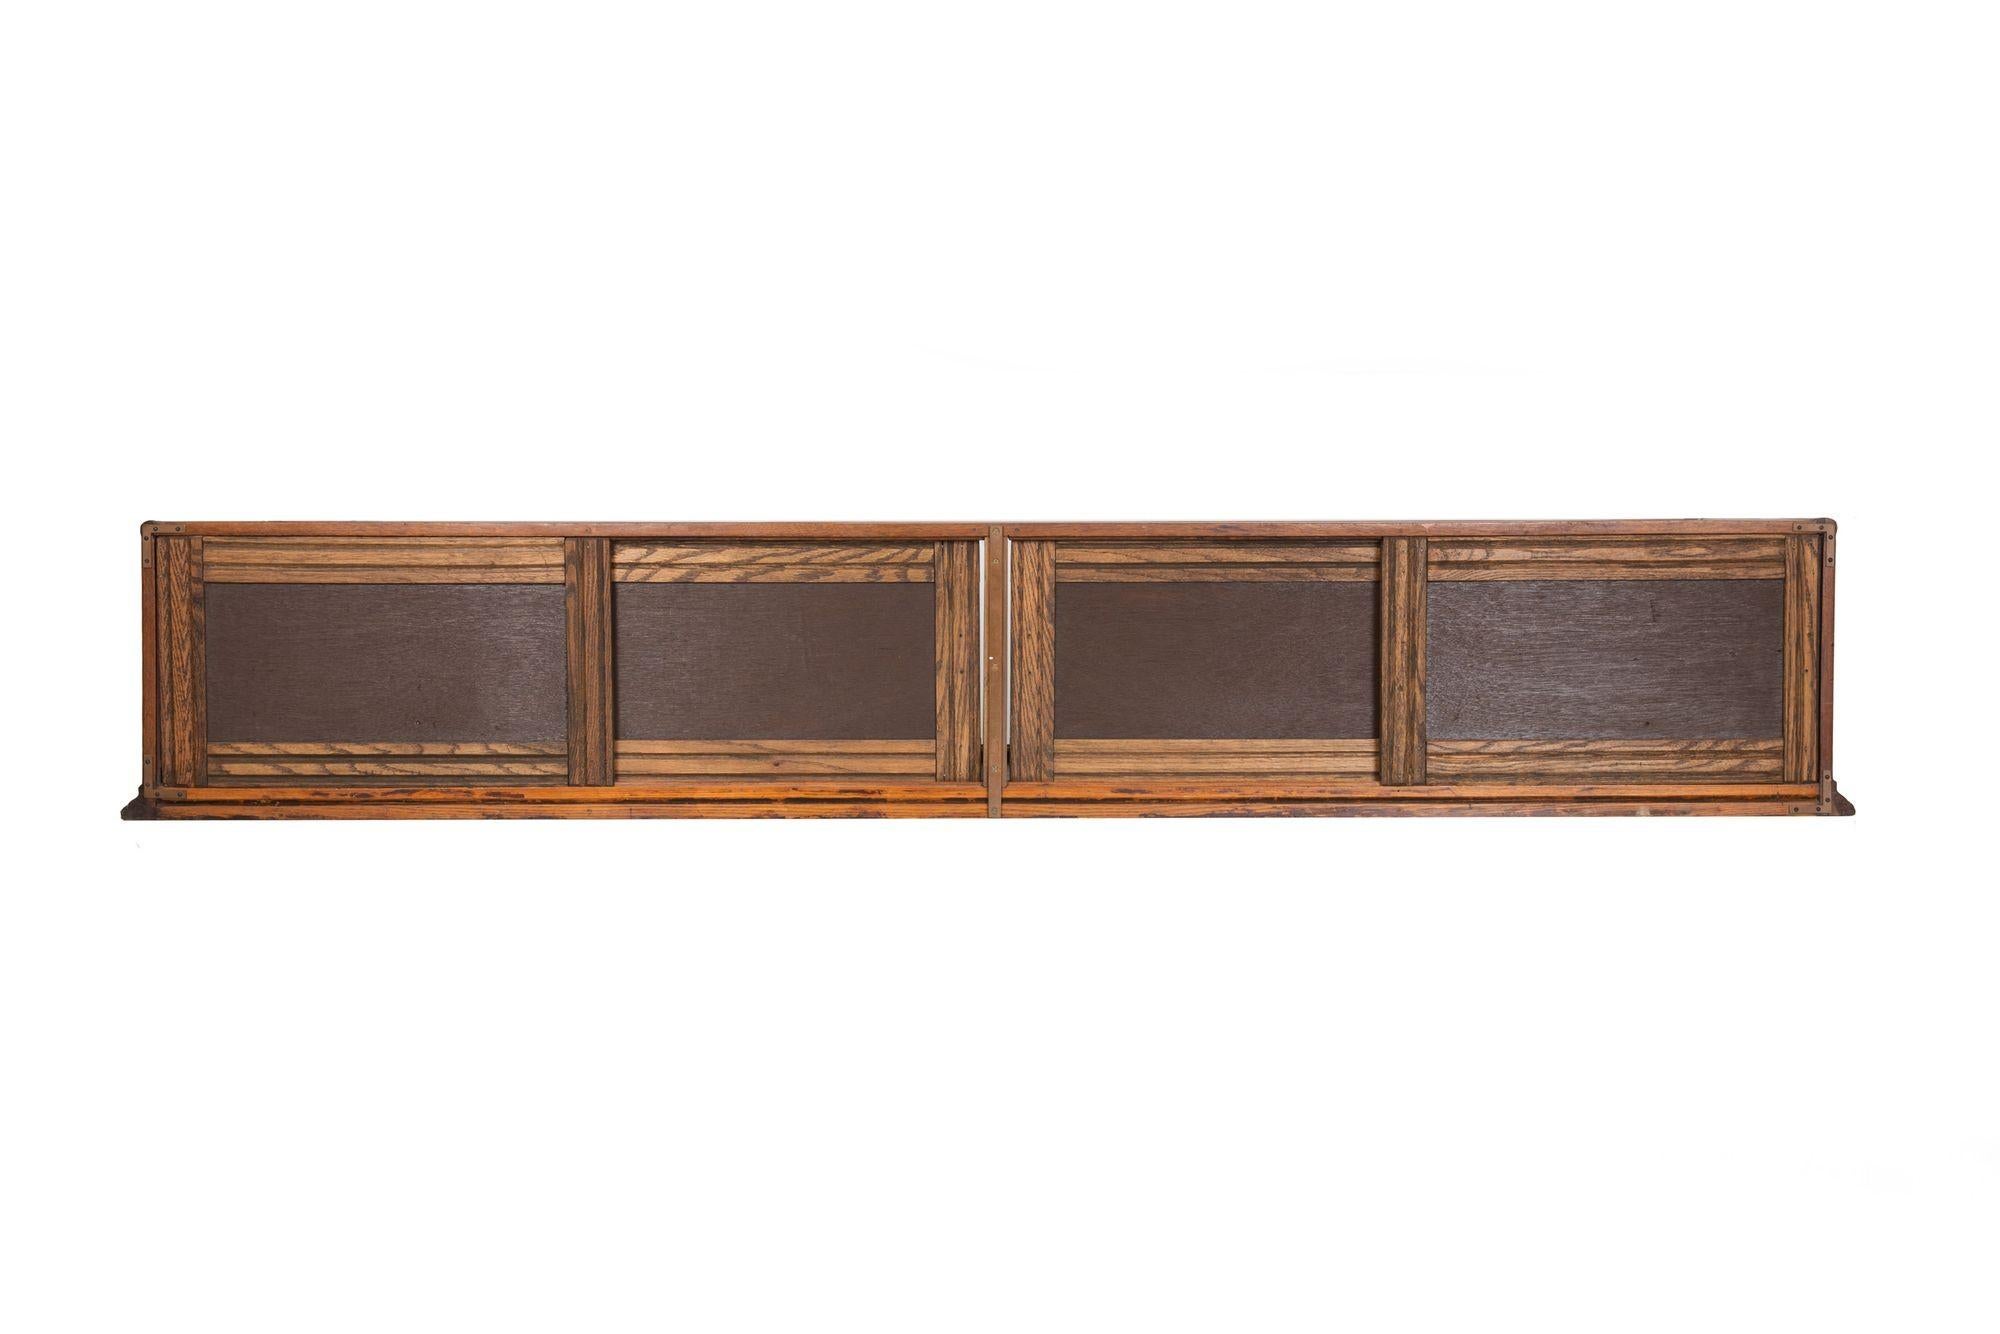 A fantastic early 20th century vintage oak, glass and brass countertop display cabinet by the Richard Sauer Manufacturing Company of Baltimore, Maryland. It remains in very good all original condition and is a fantastic addition to any vintage shop.